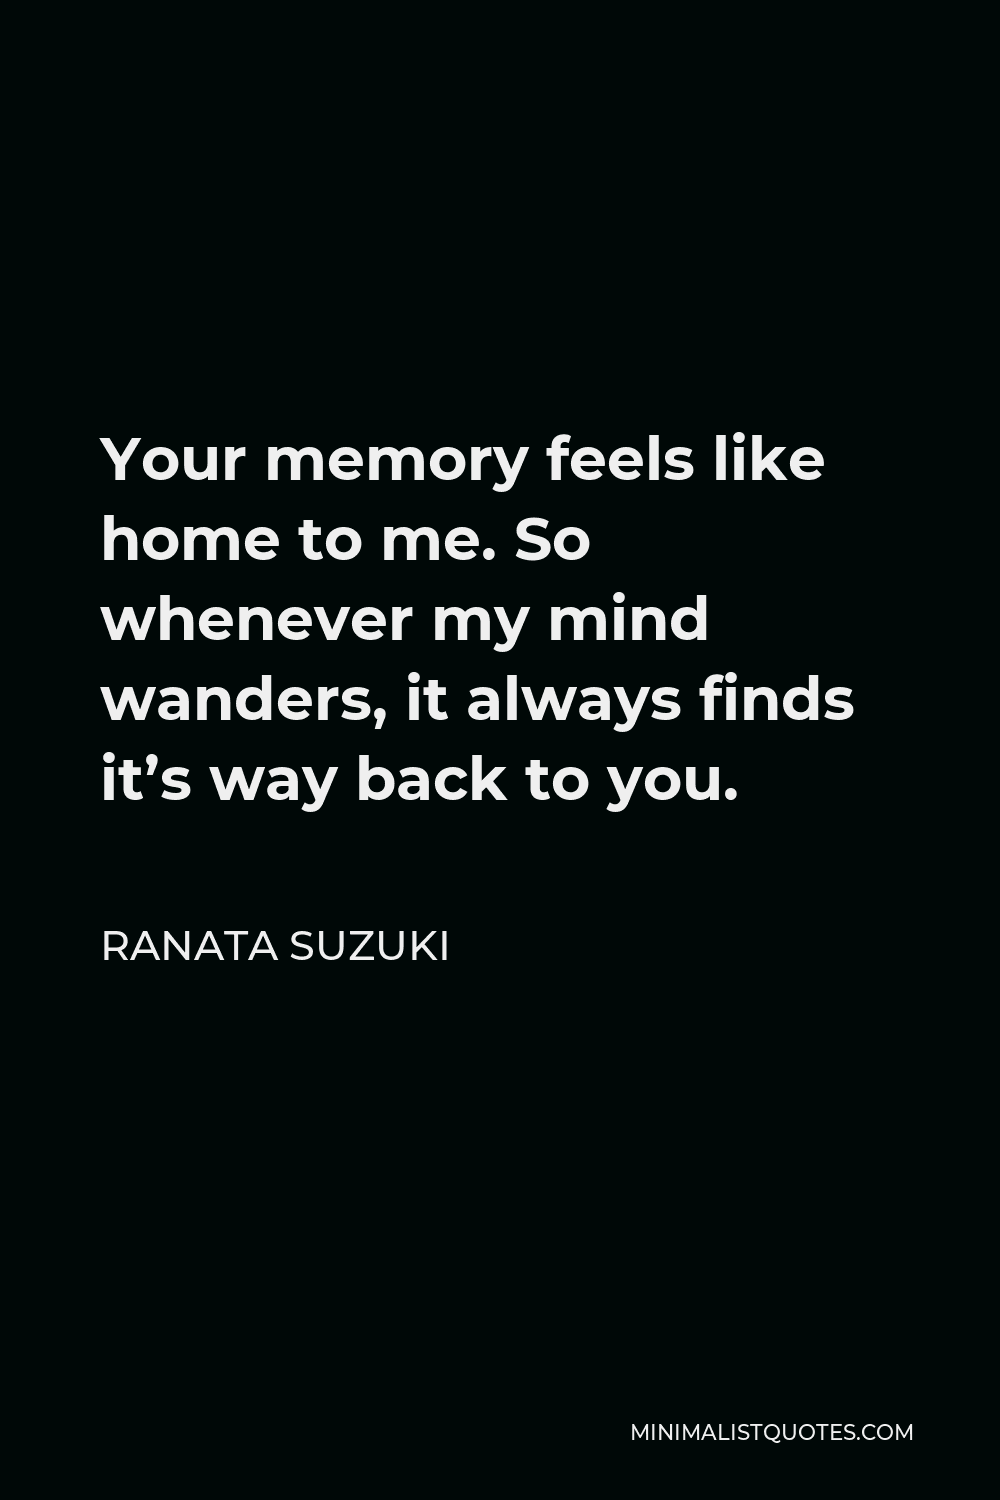 Ranata Suzuki Quote - Your memory feels like home to me. So whenever my mind wanders, it always finds it’s way back to you.